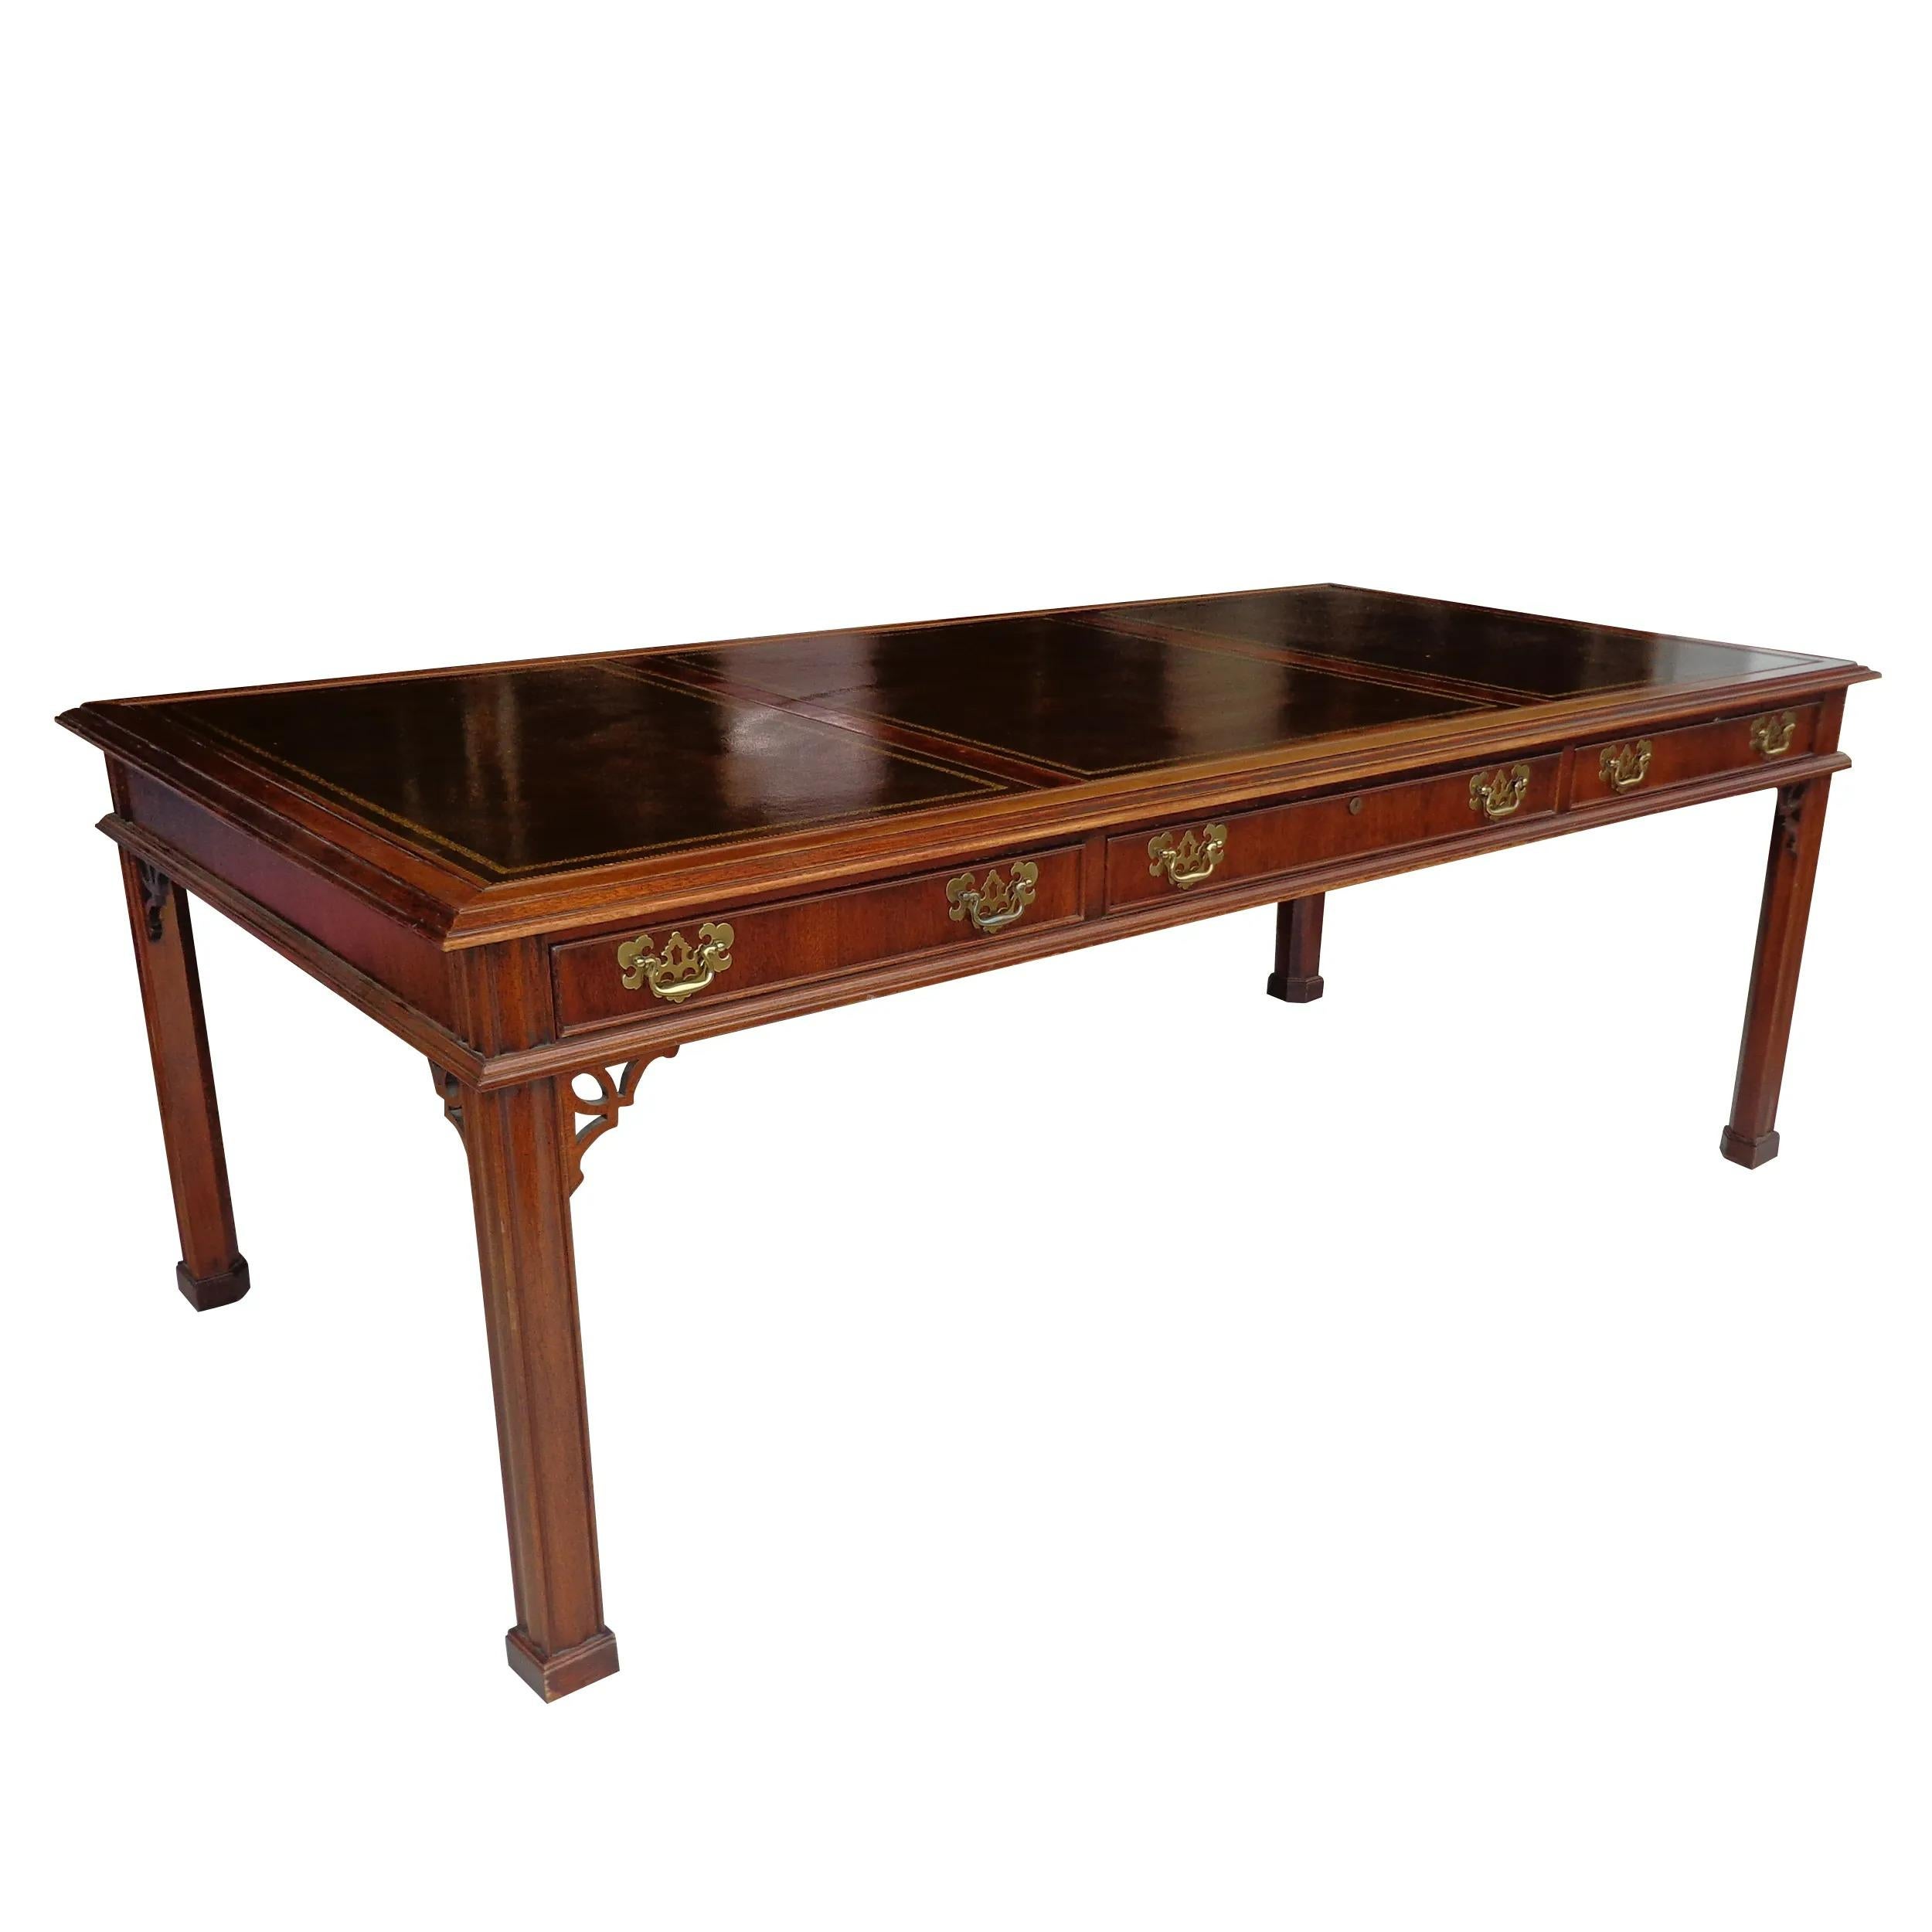 84? Banded Chippendale Regency sligh furniture writing desk

Traditional mahogany writing desk inspired by Chippendale desks from the Regency period with Classic straight legs. 2 drawer with compartments. Banded top with tooled leather insets.  We